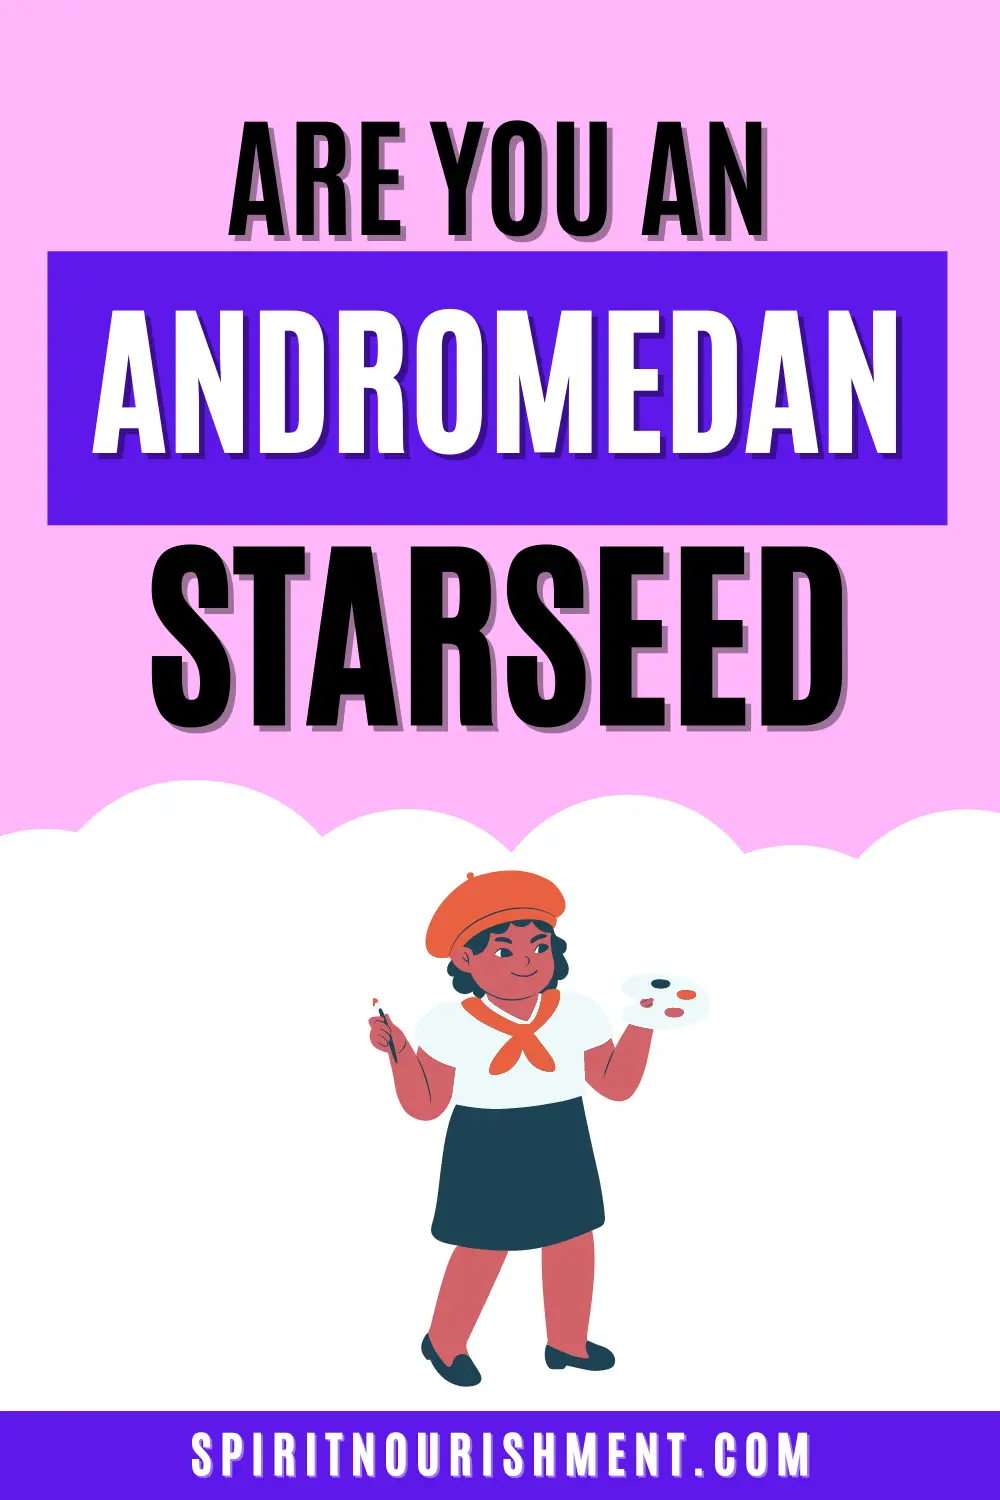 Are you an Andromedan Starseed 18 Major Traits, Mission & Purpose